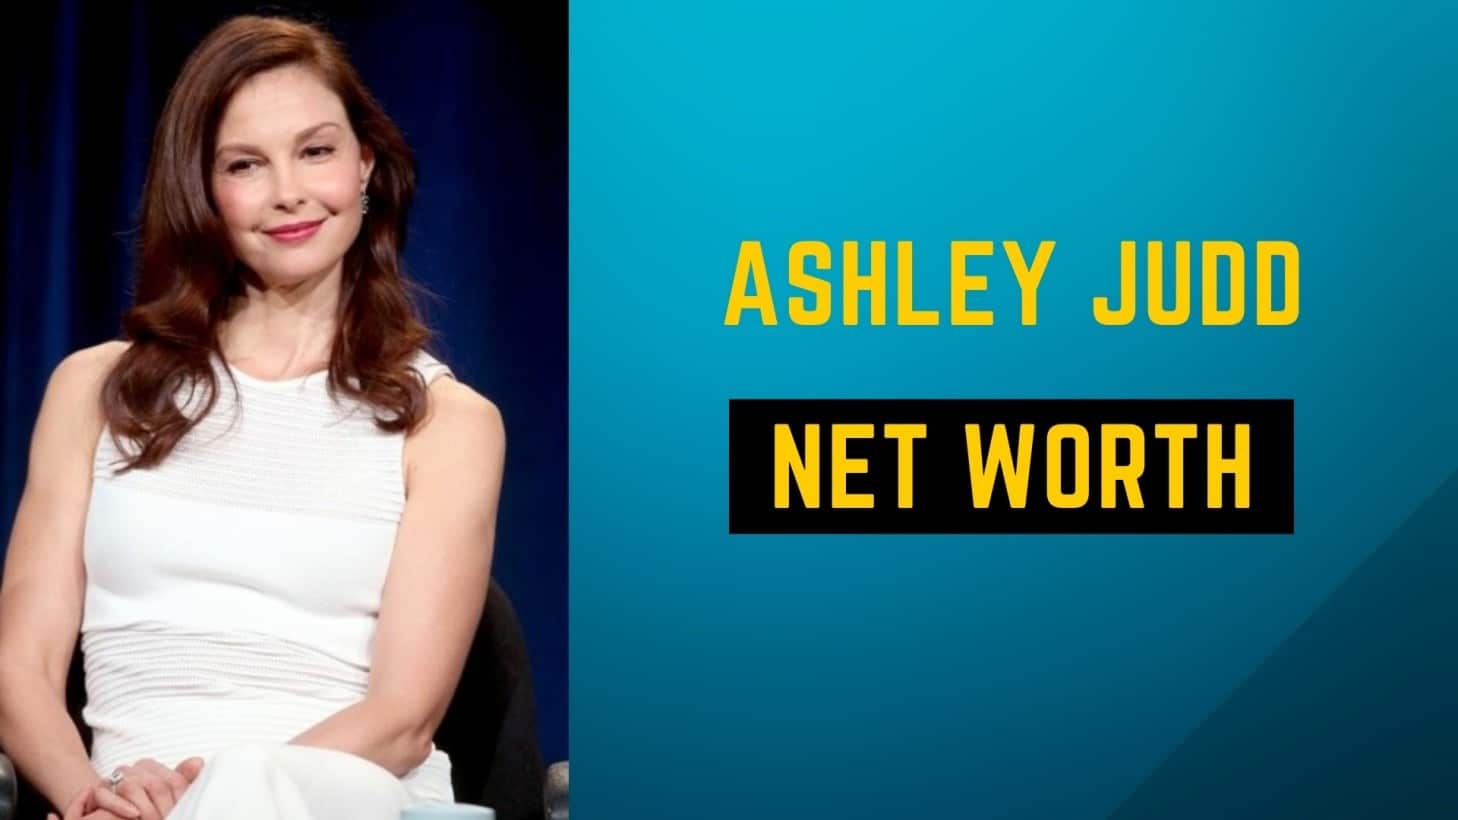 American Actress Ashley Judd Net Worth In 2022: Early Life, Career, Husband, Children, And More